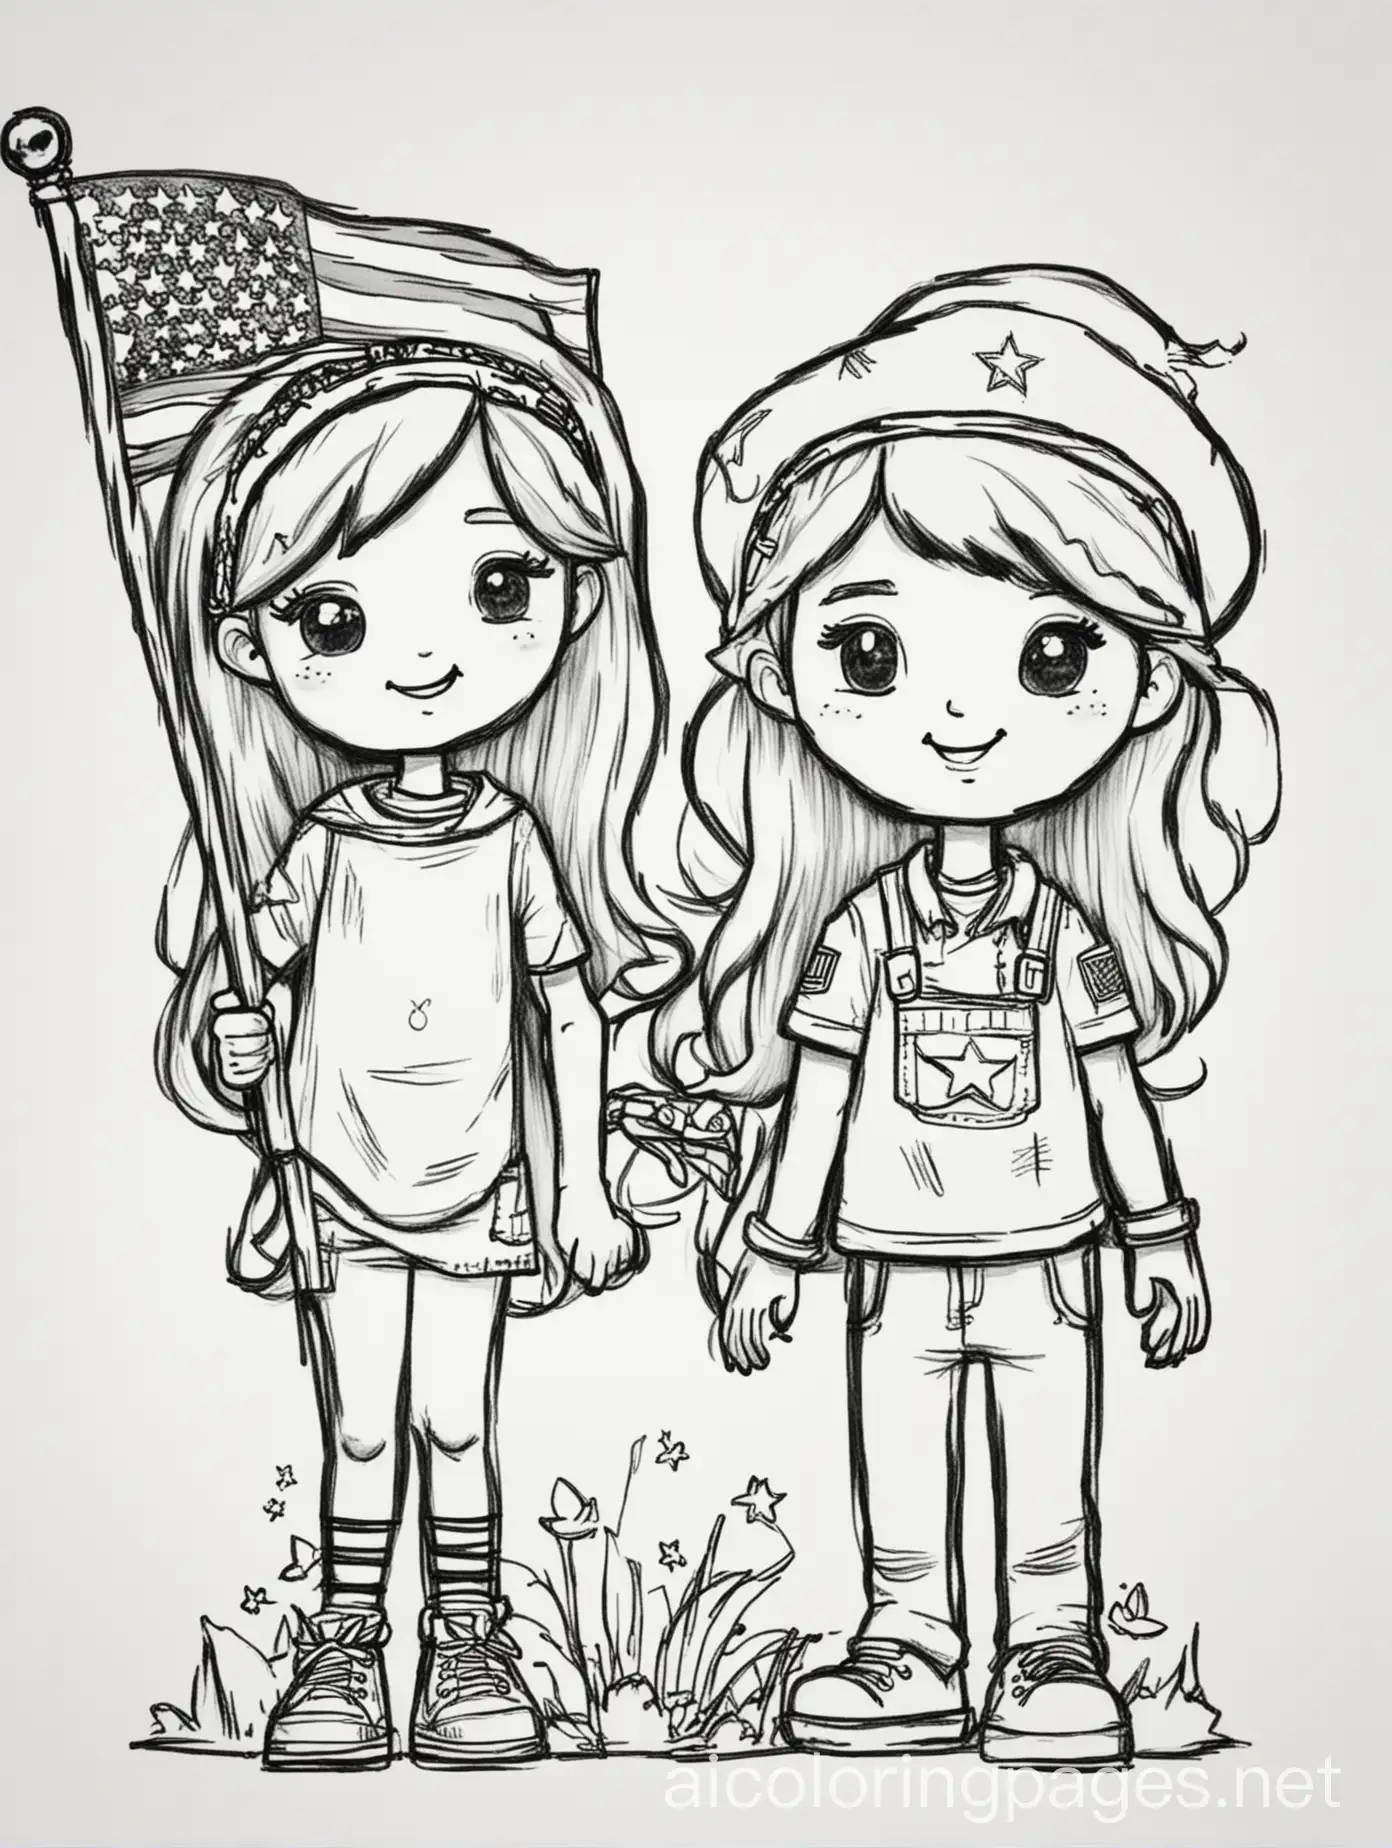 Kid fun friends.  Memorial Day, Coloring Page, black and white, line art, white background, Simplicity, Ample White Space.